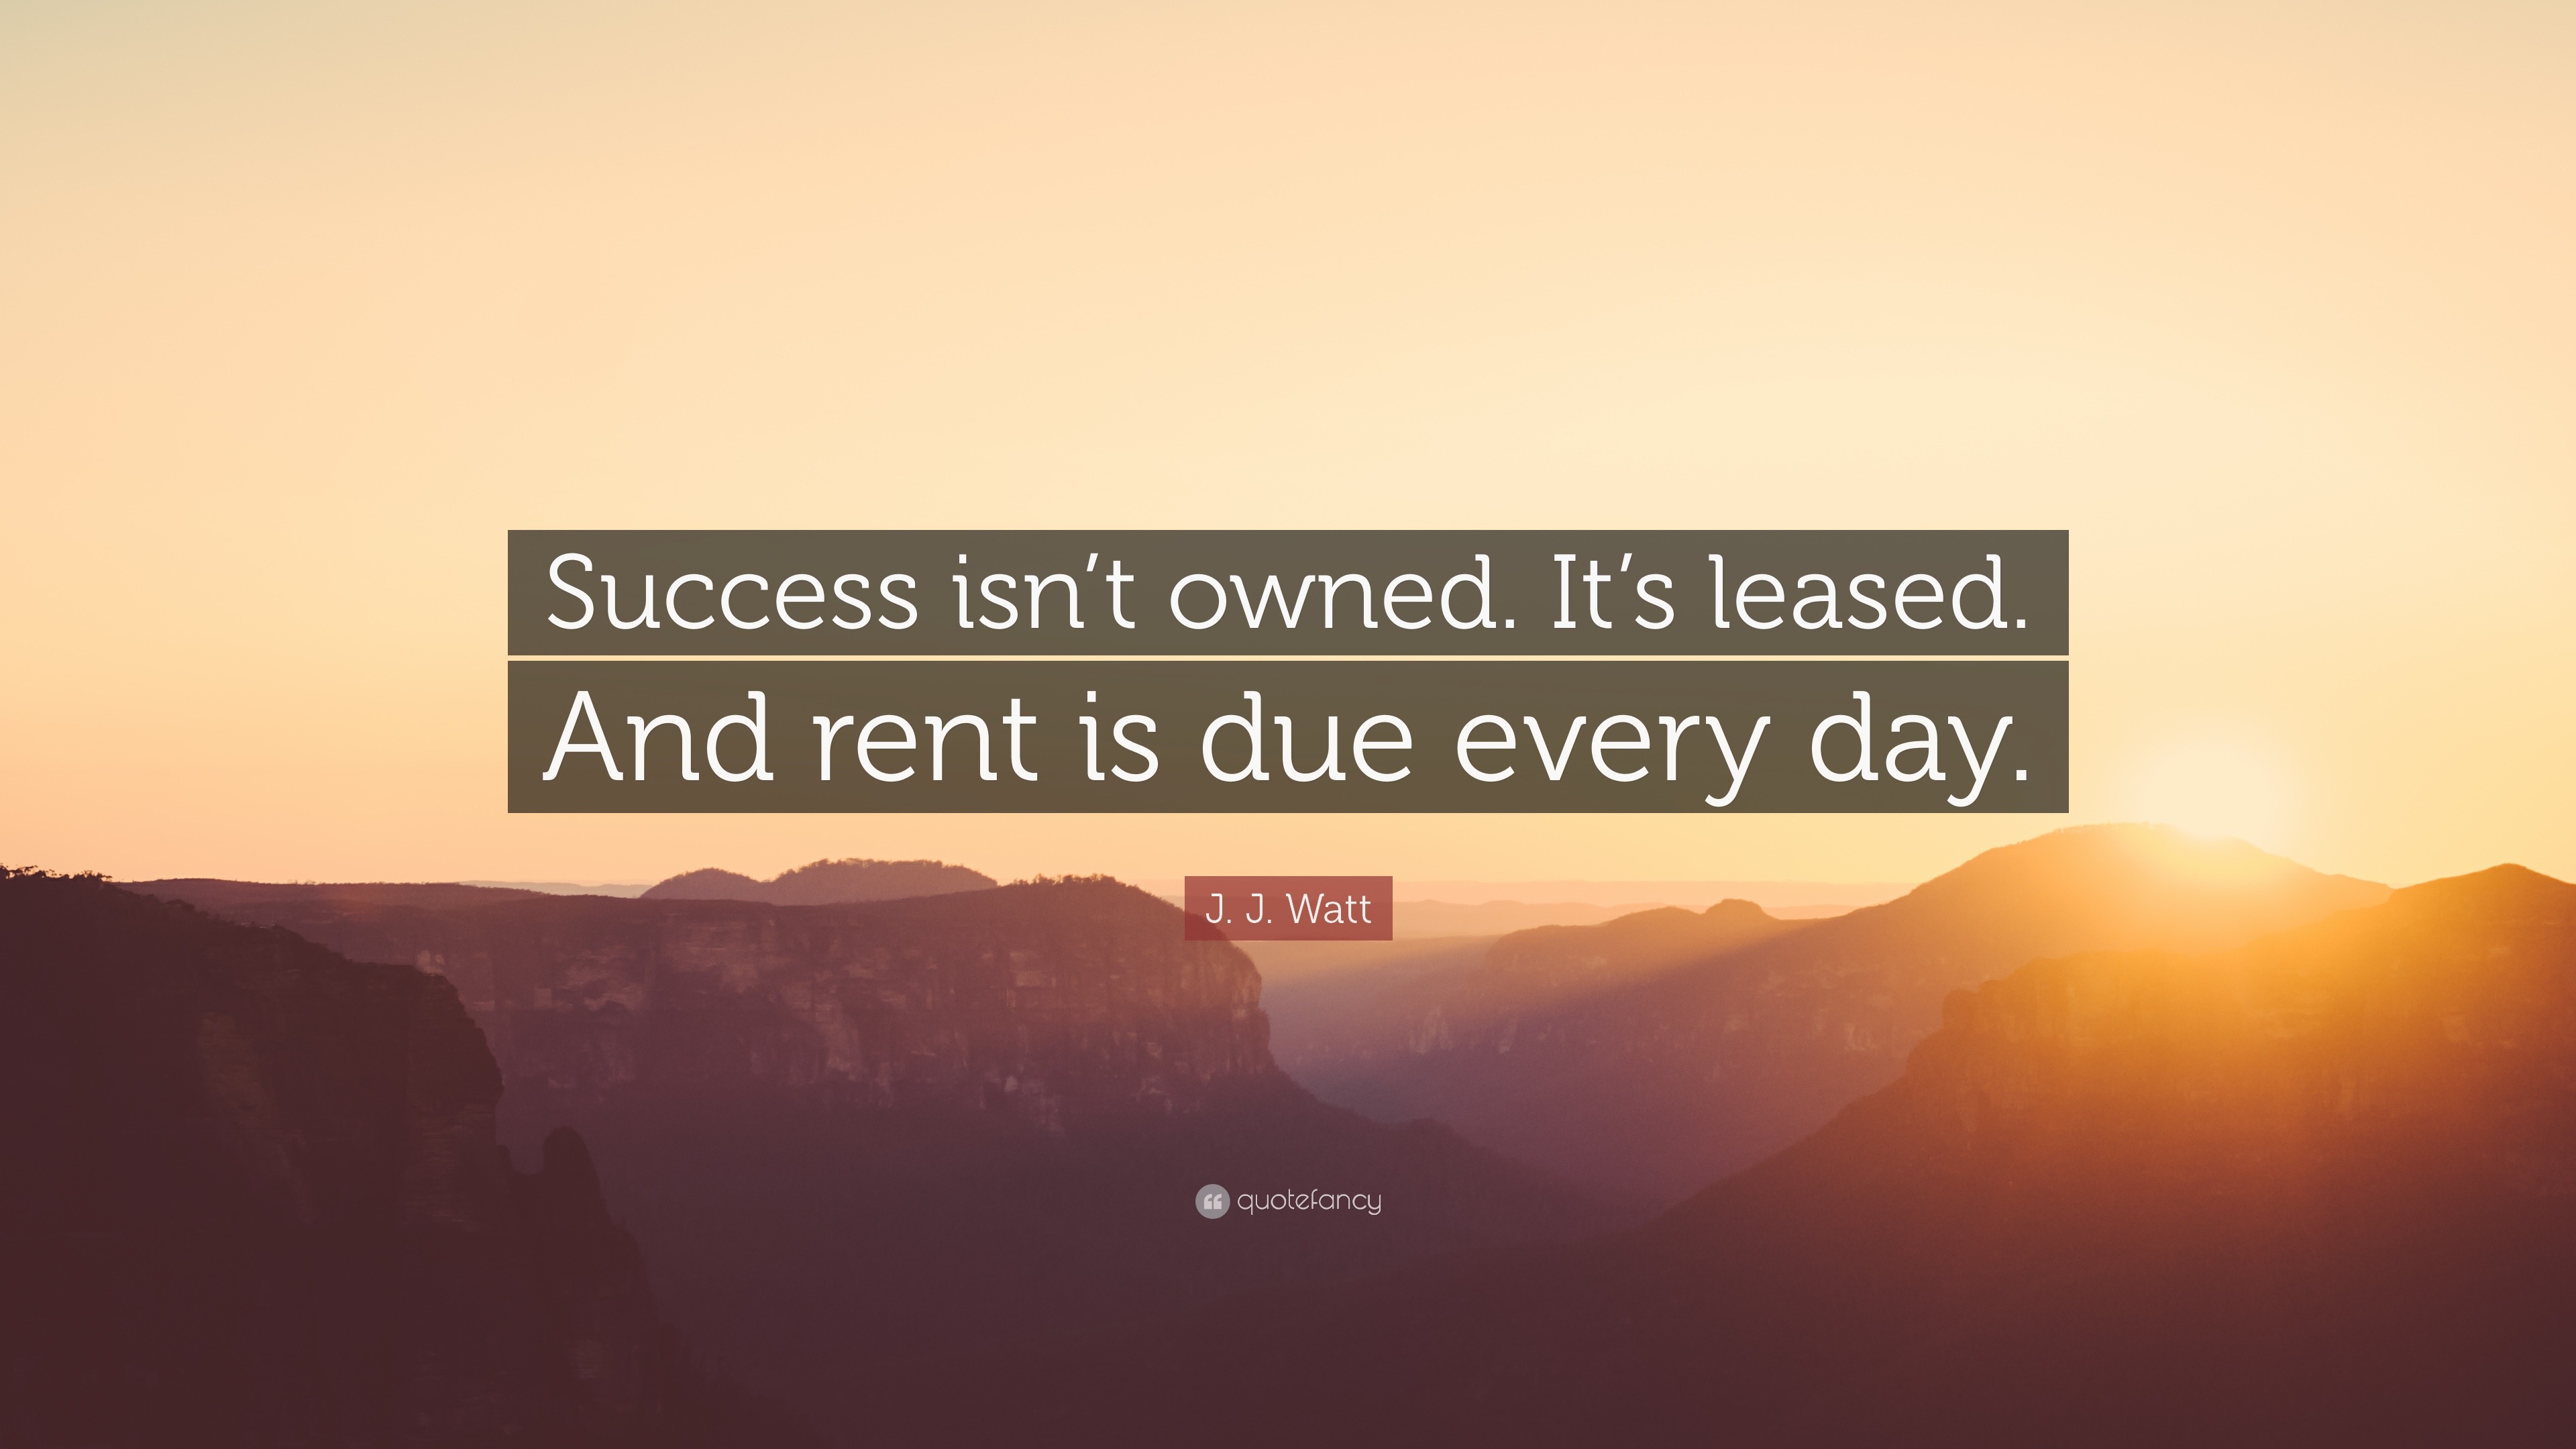 19090 J J Watt Quote Success isn t owned It s leased And rent is due